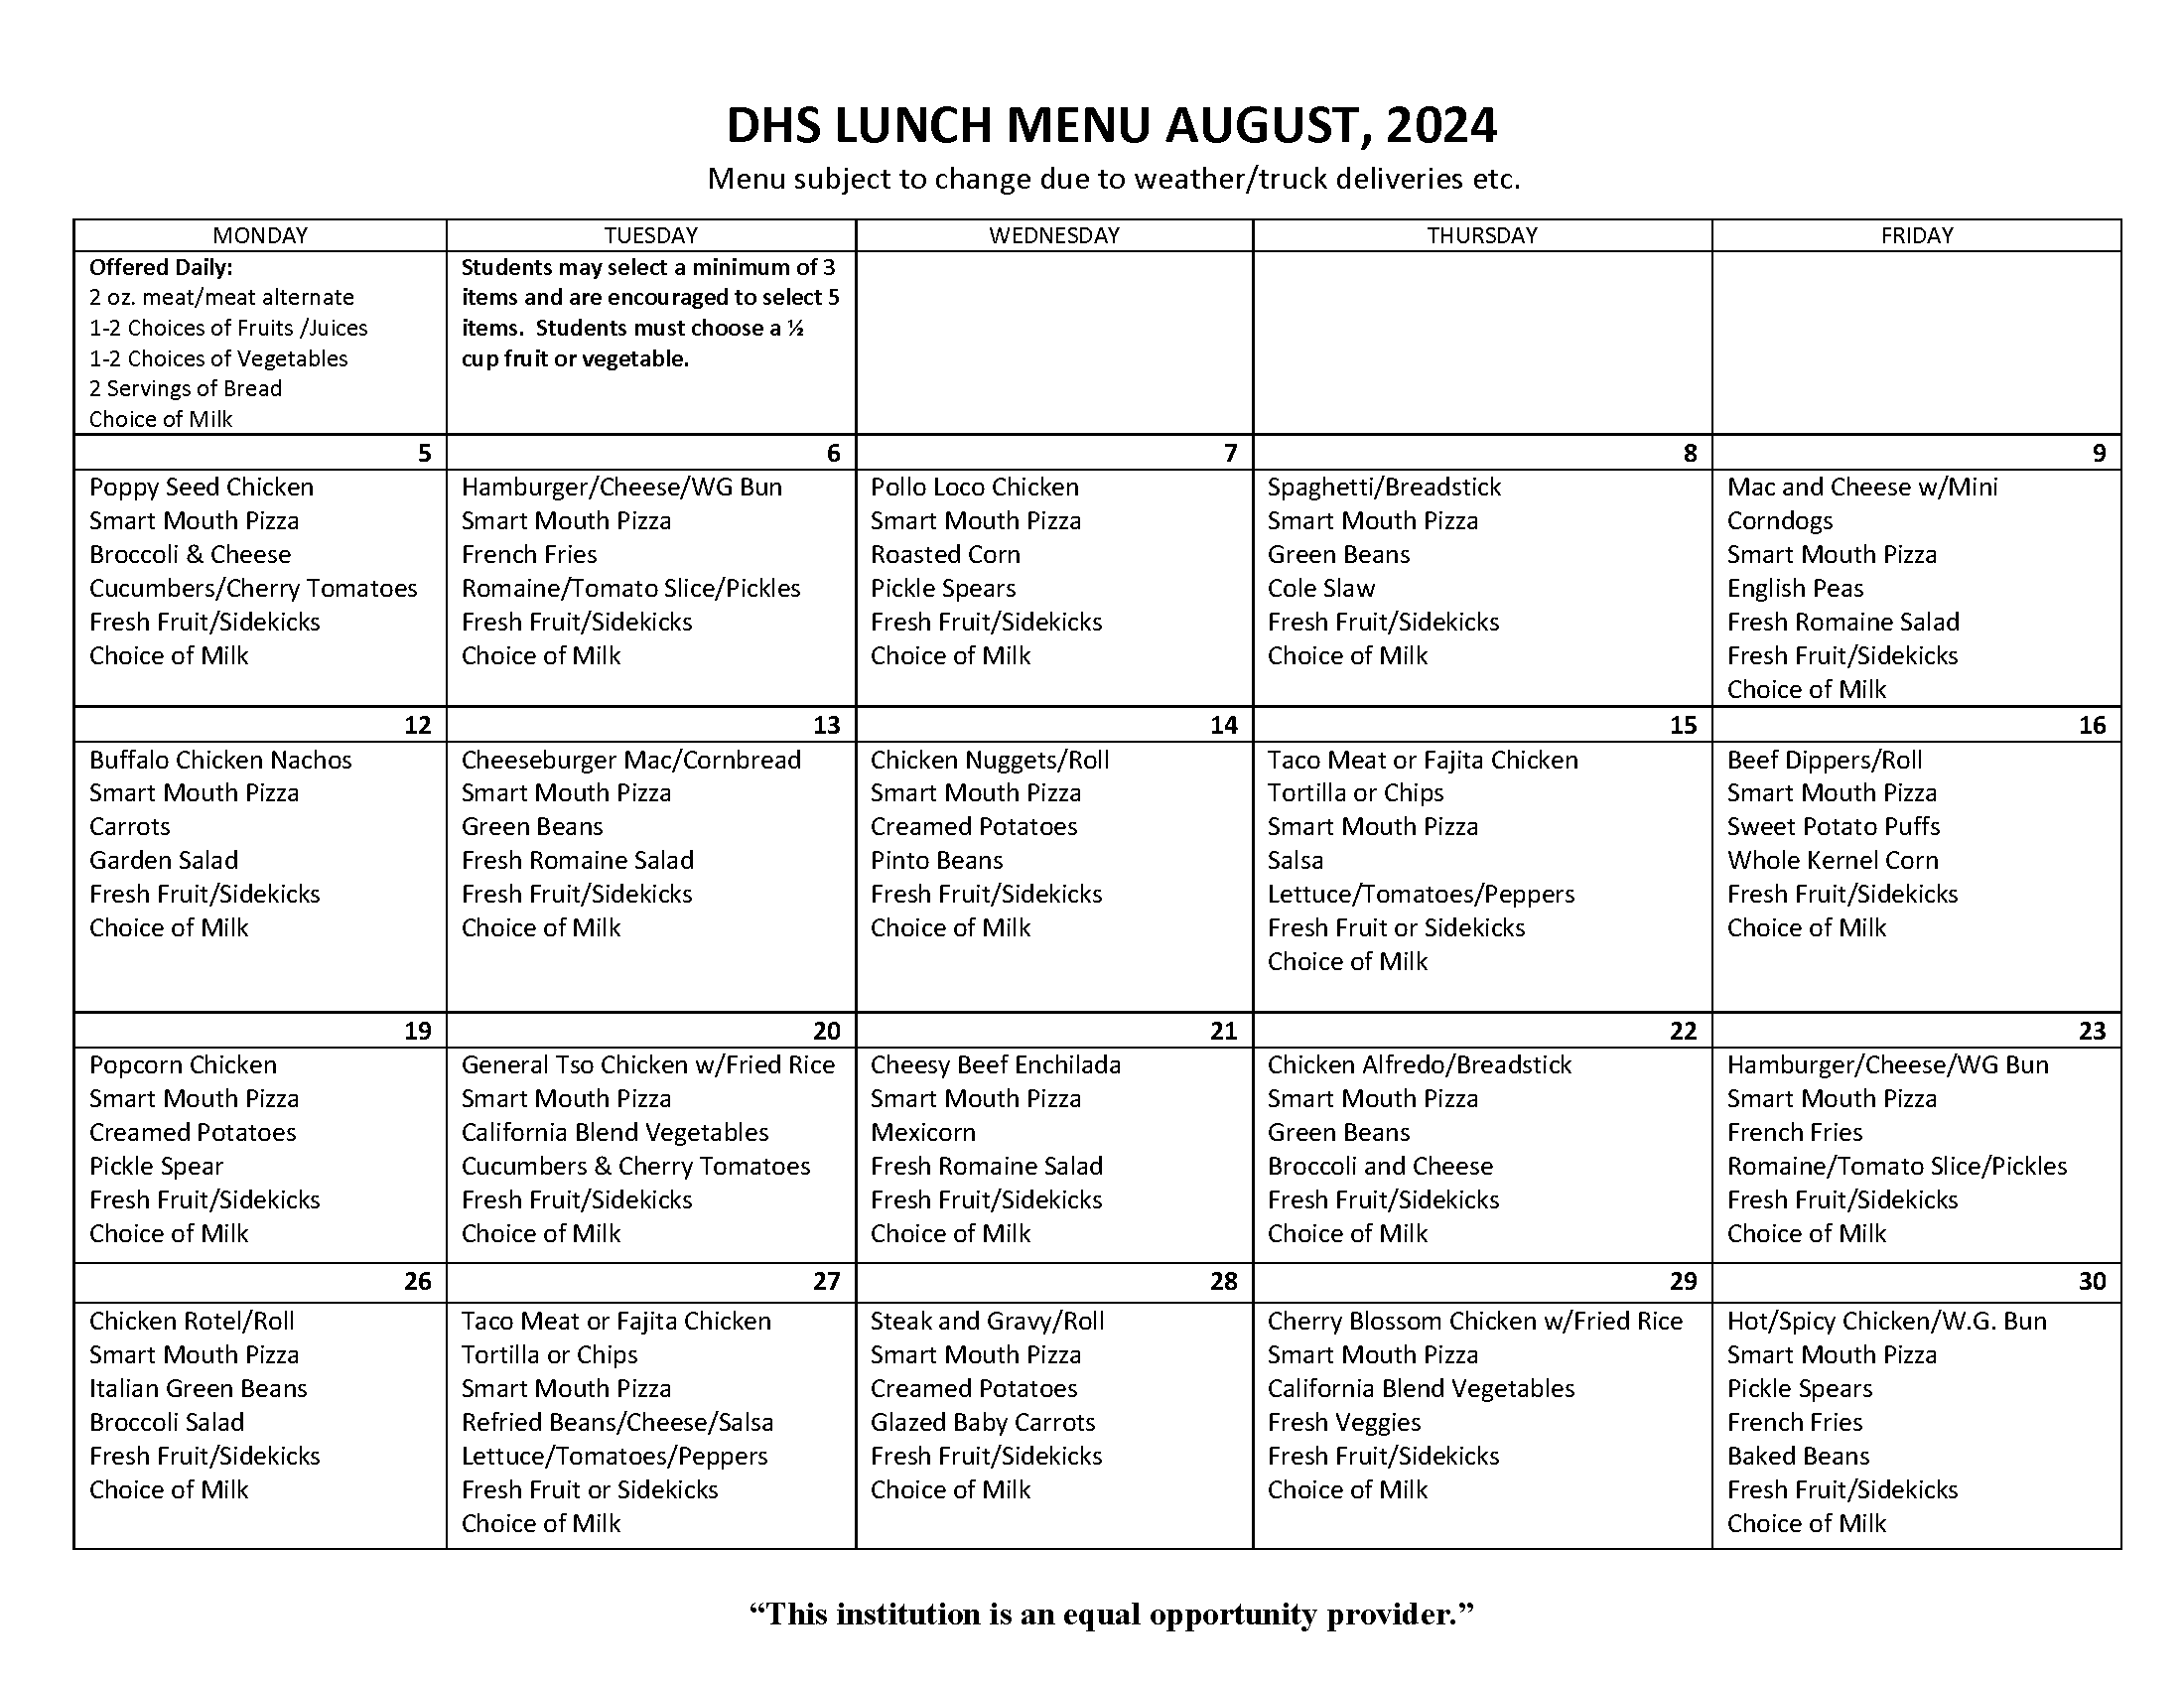 DHS Lunch Menu Page 1